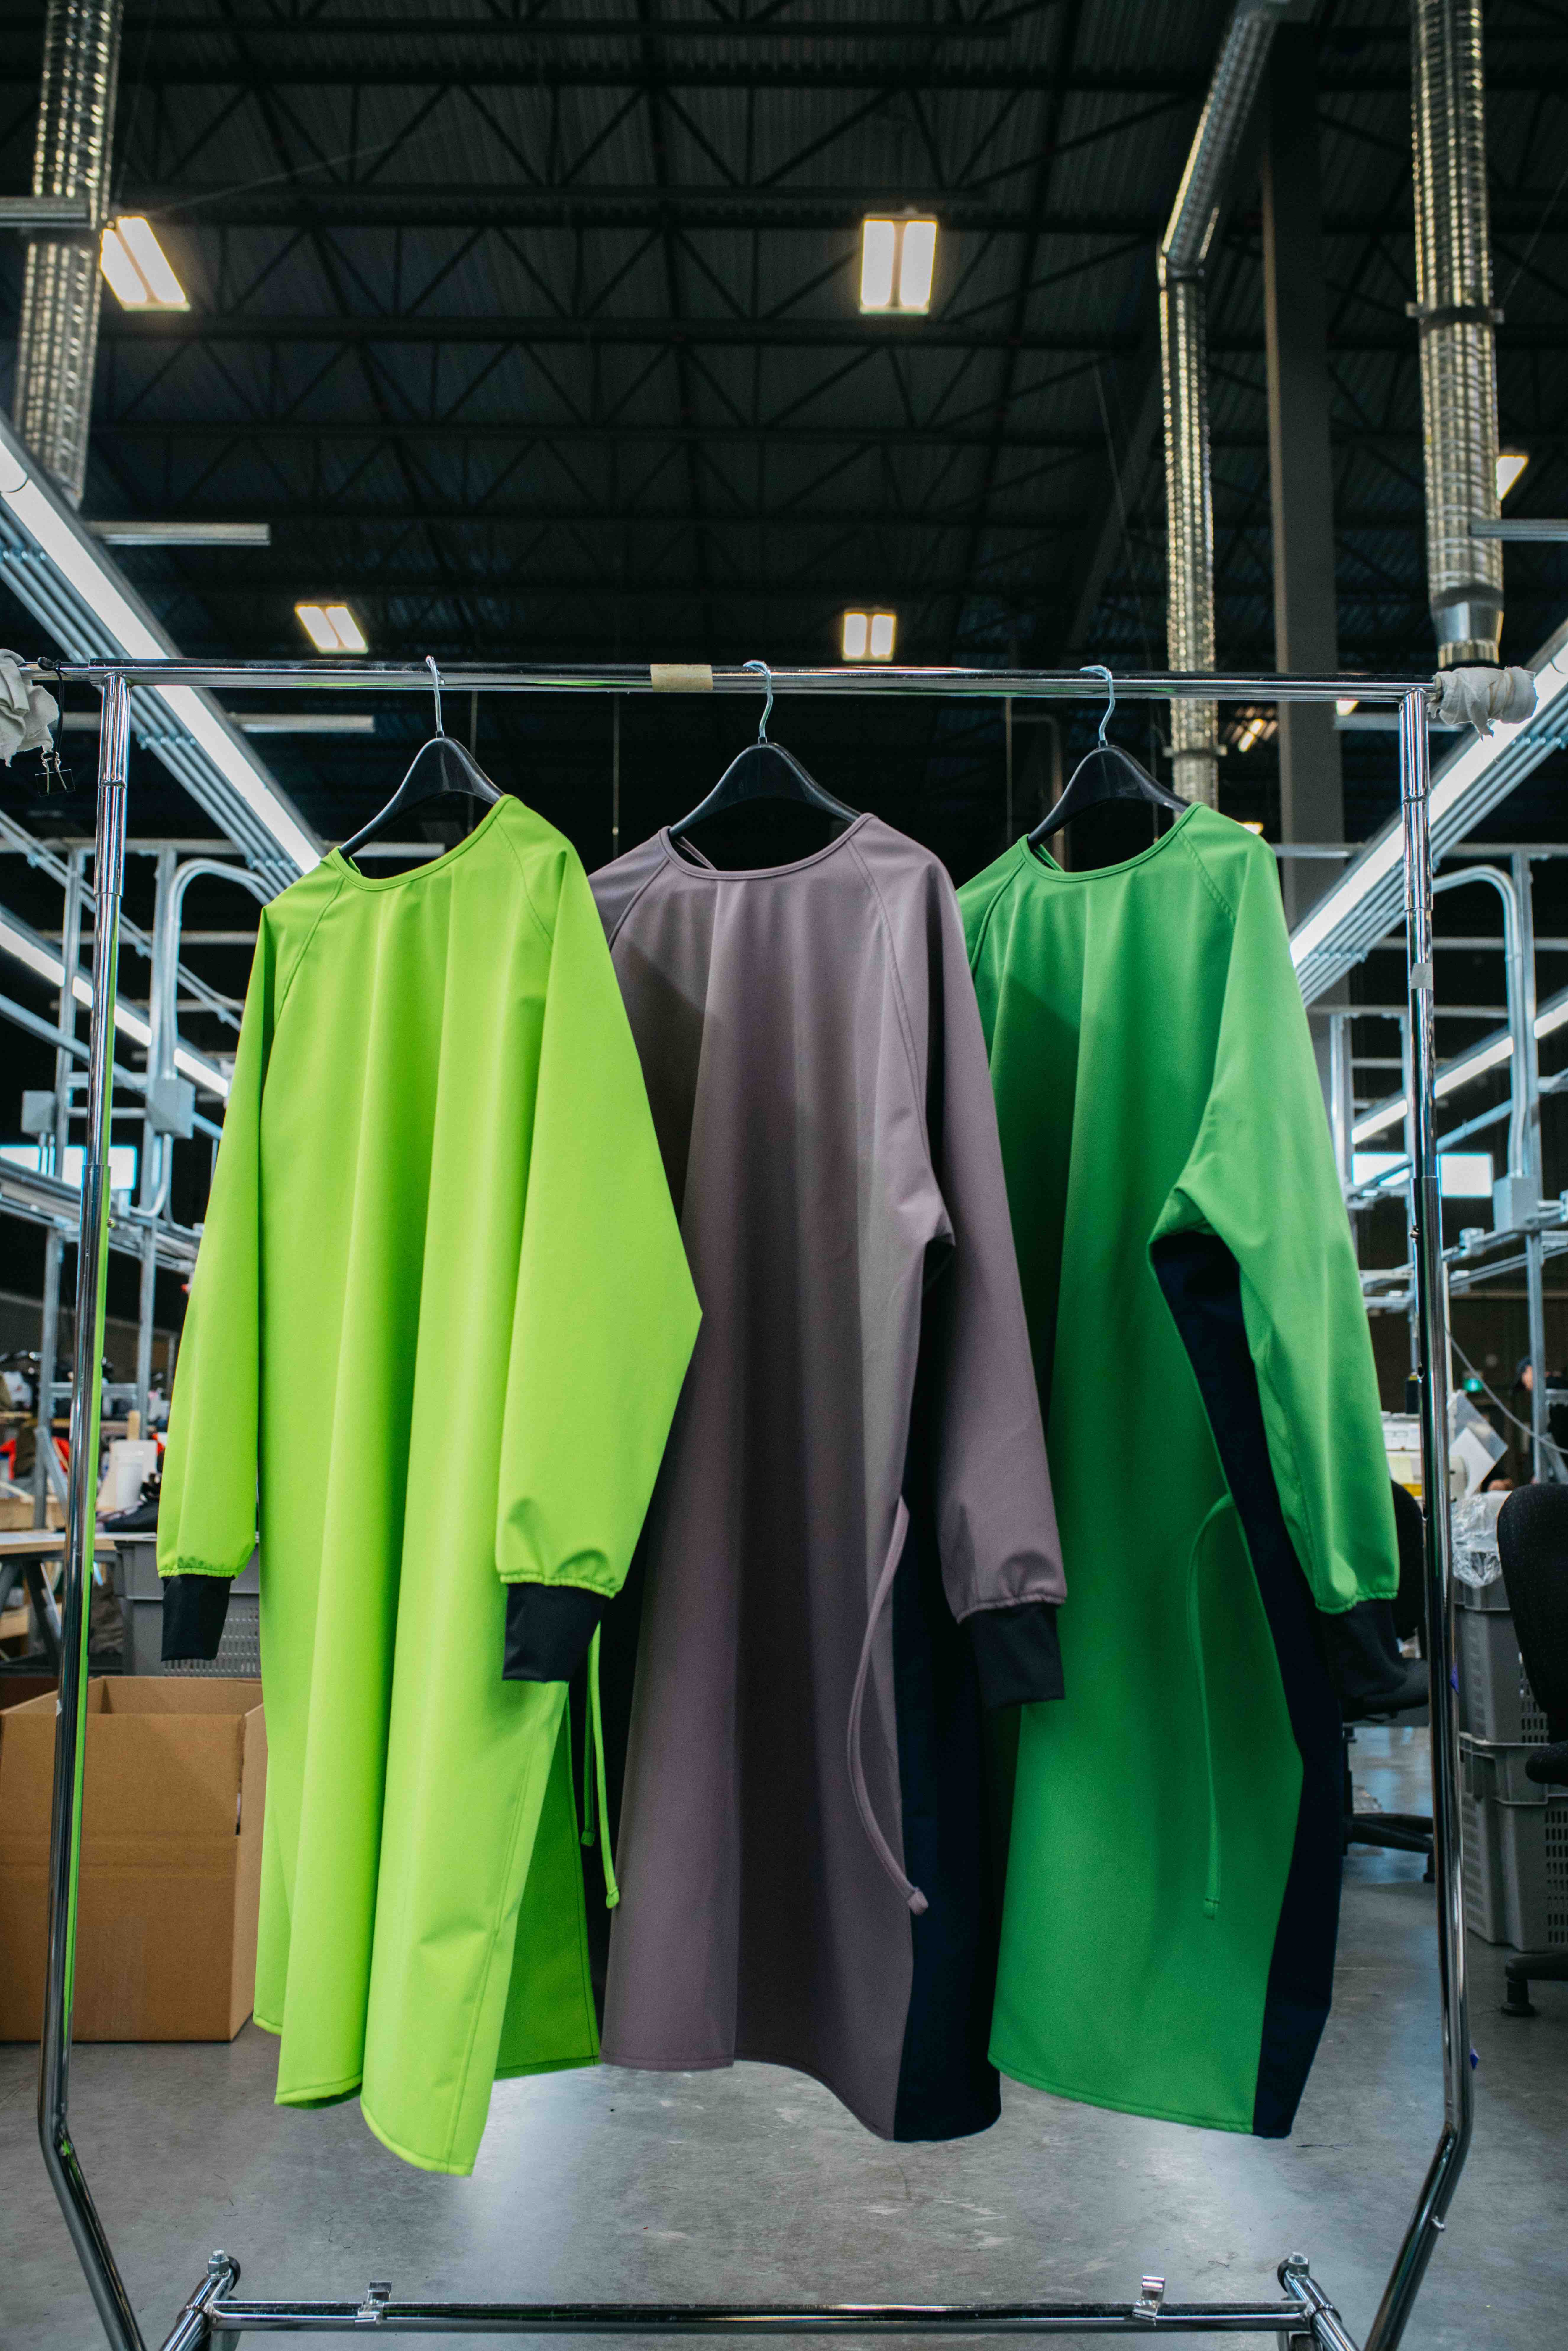 Arc'teryx's 'It' Status Helps Propel Brand for Global Growth